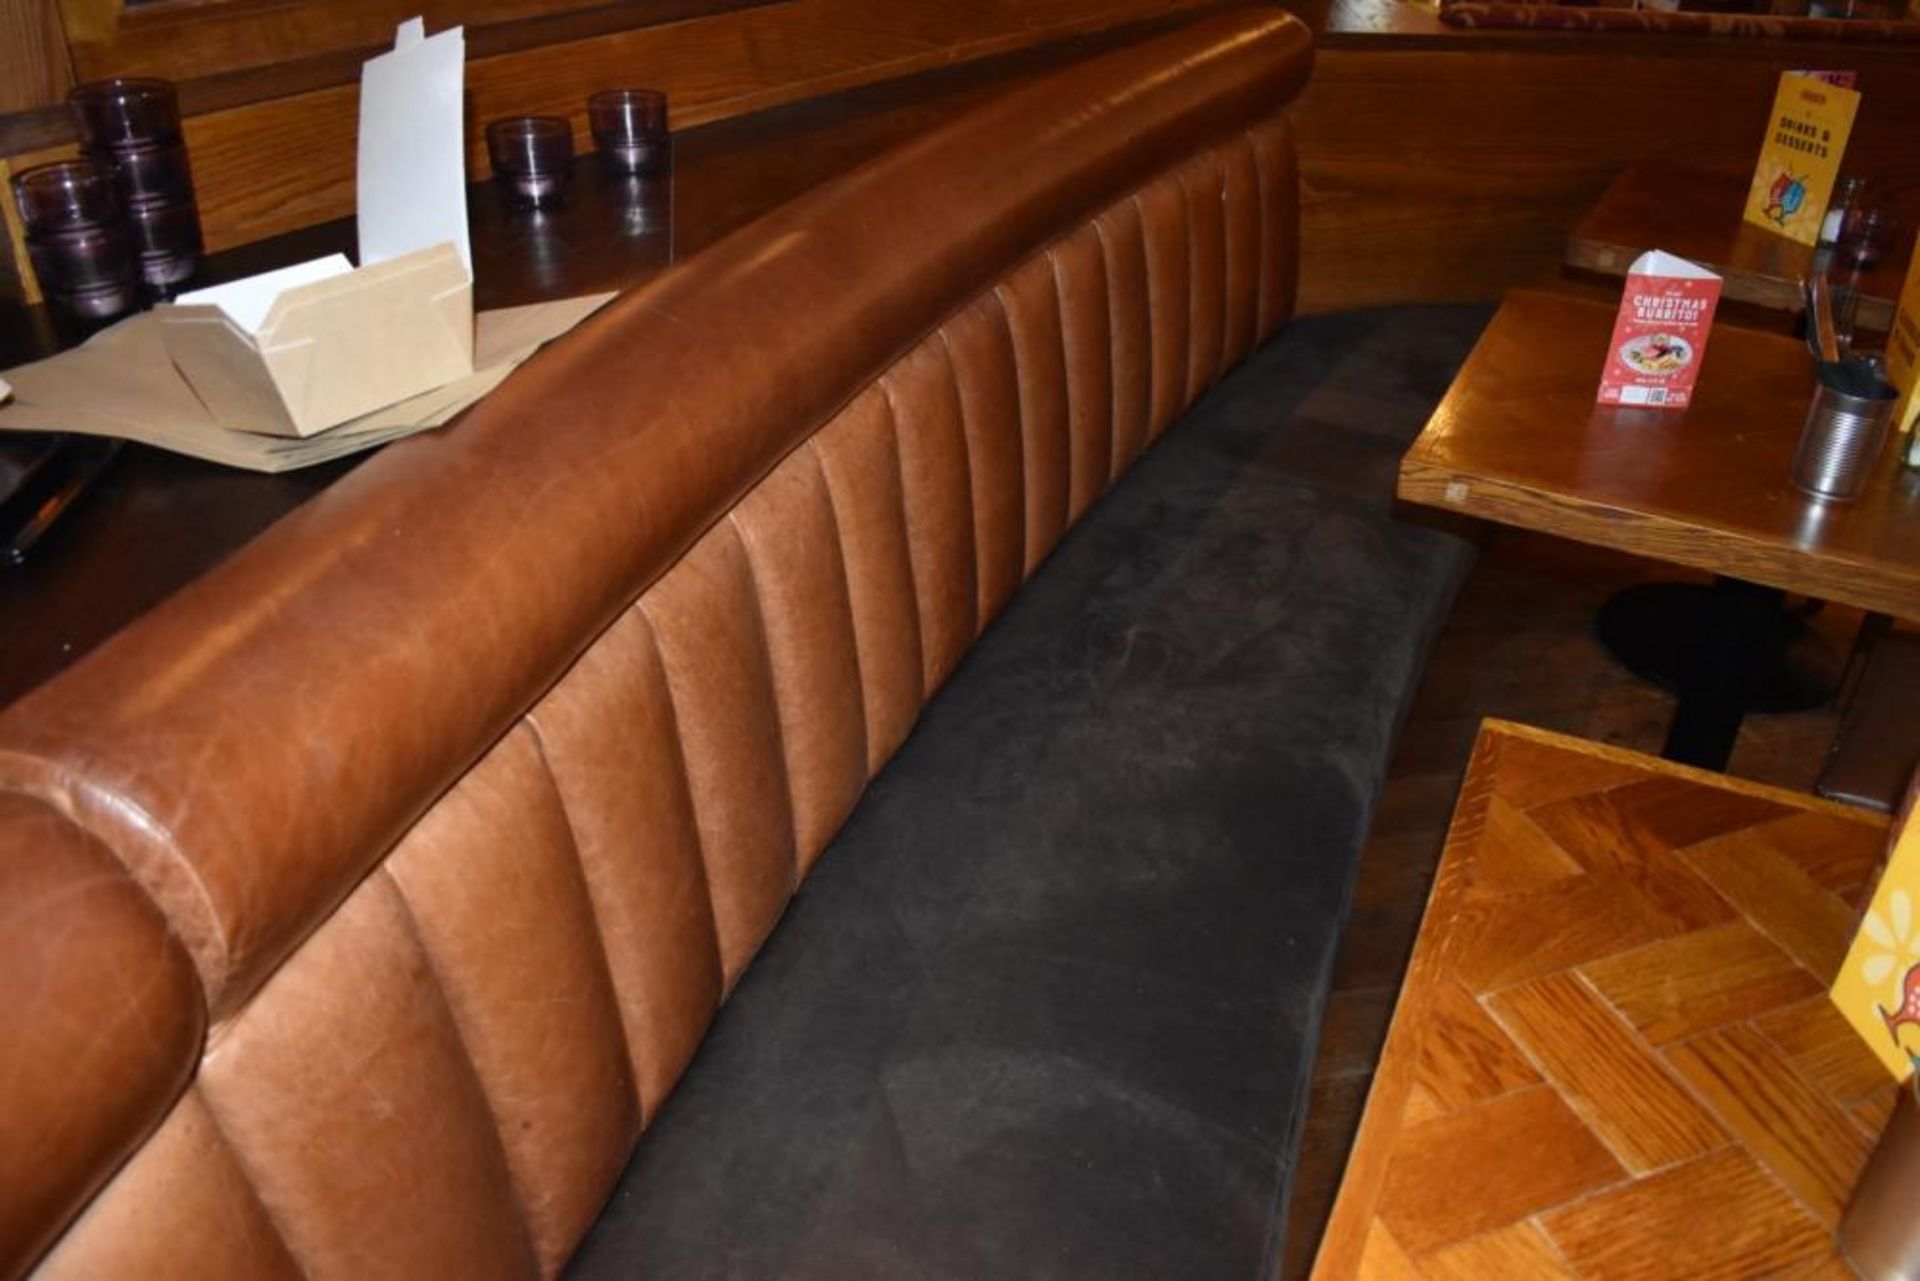 1 x Long Curved Seating Bench From Mexican Themed Restaurant - CL461 - Ref PR891 - Location: London - Image 6 of 14